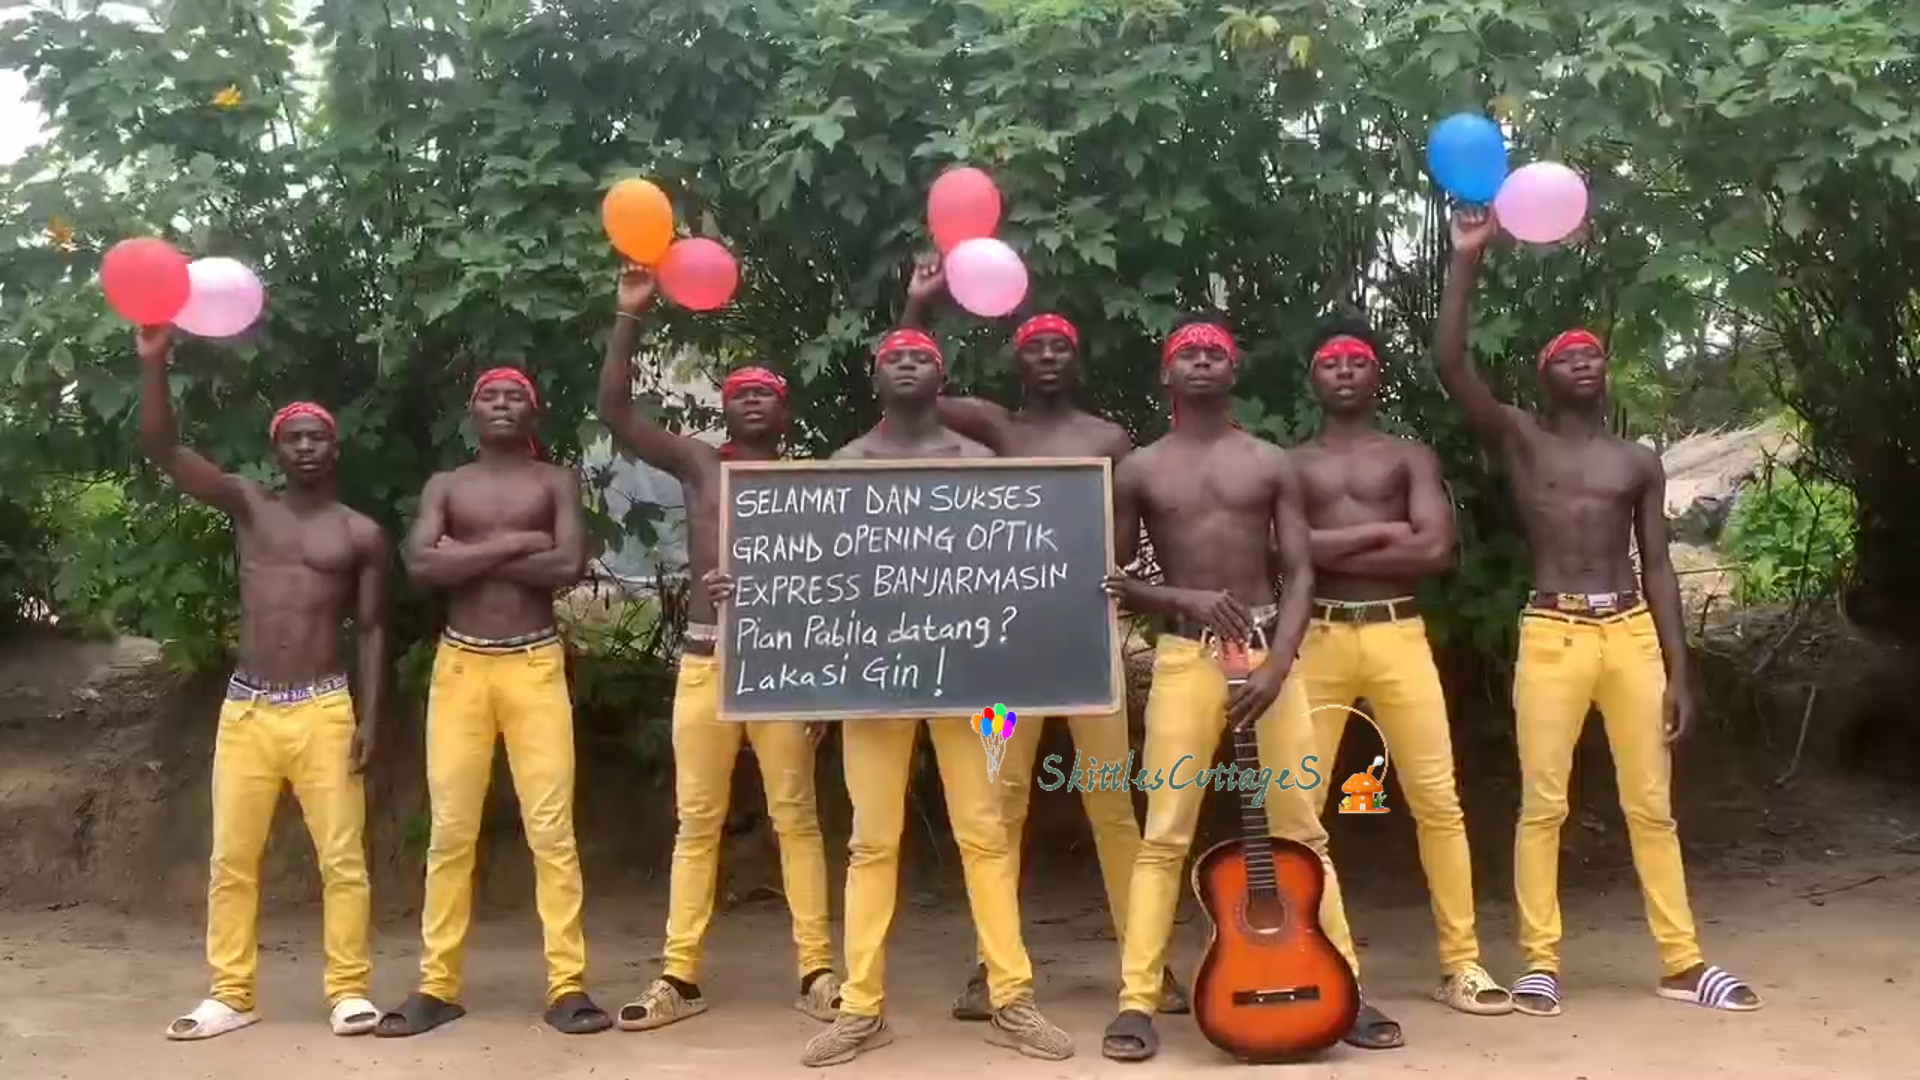 Greetings Video from Africa - Rhythm Blessings - Skittles Cottage